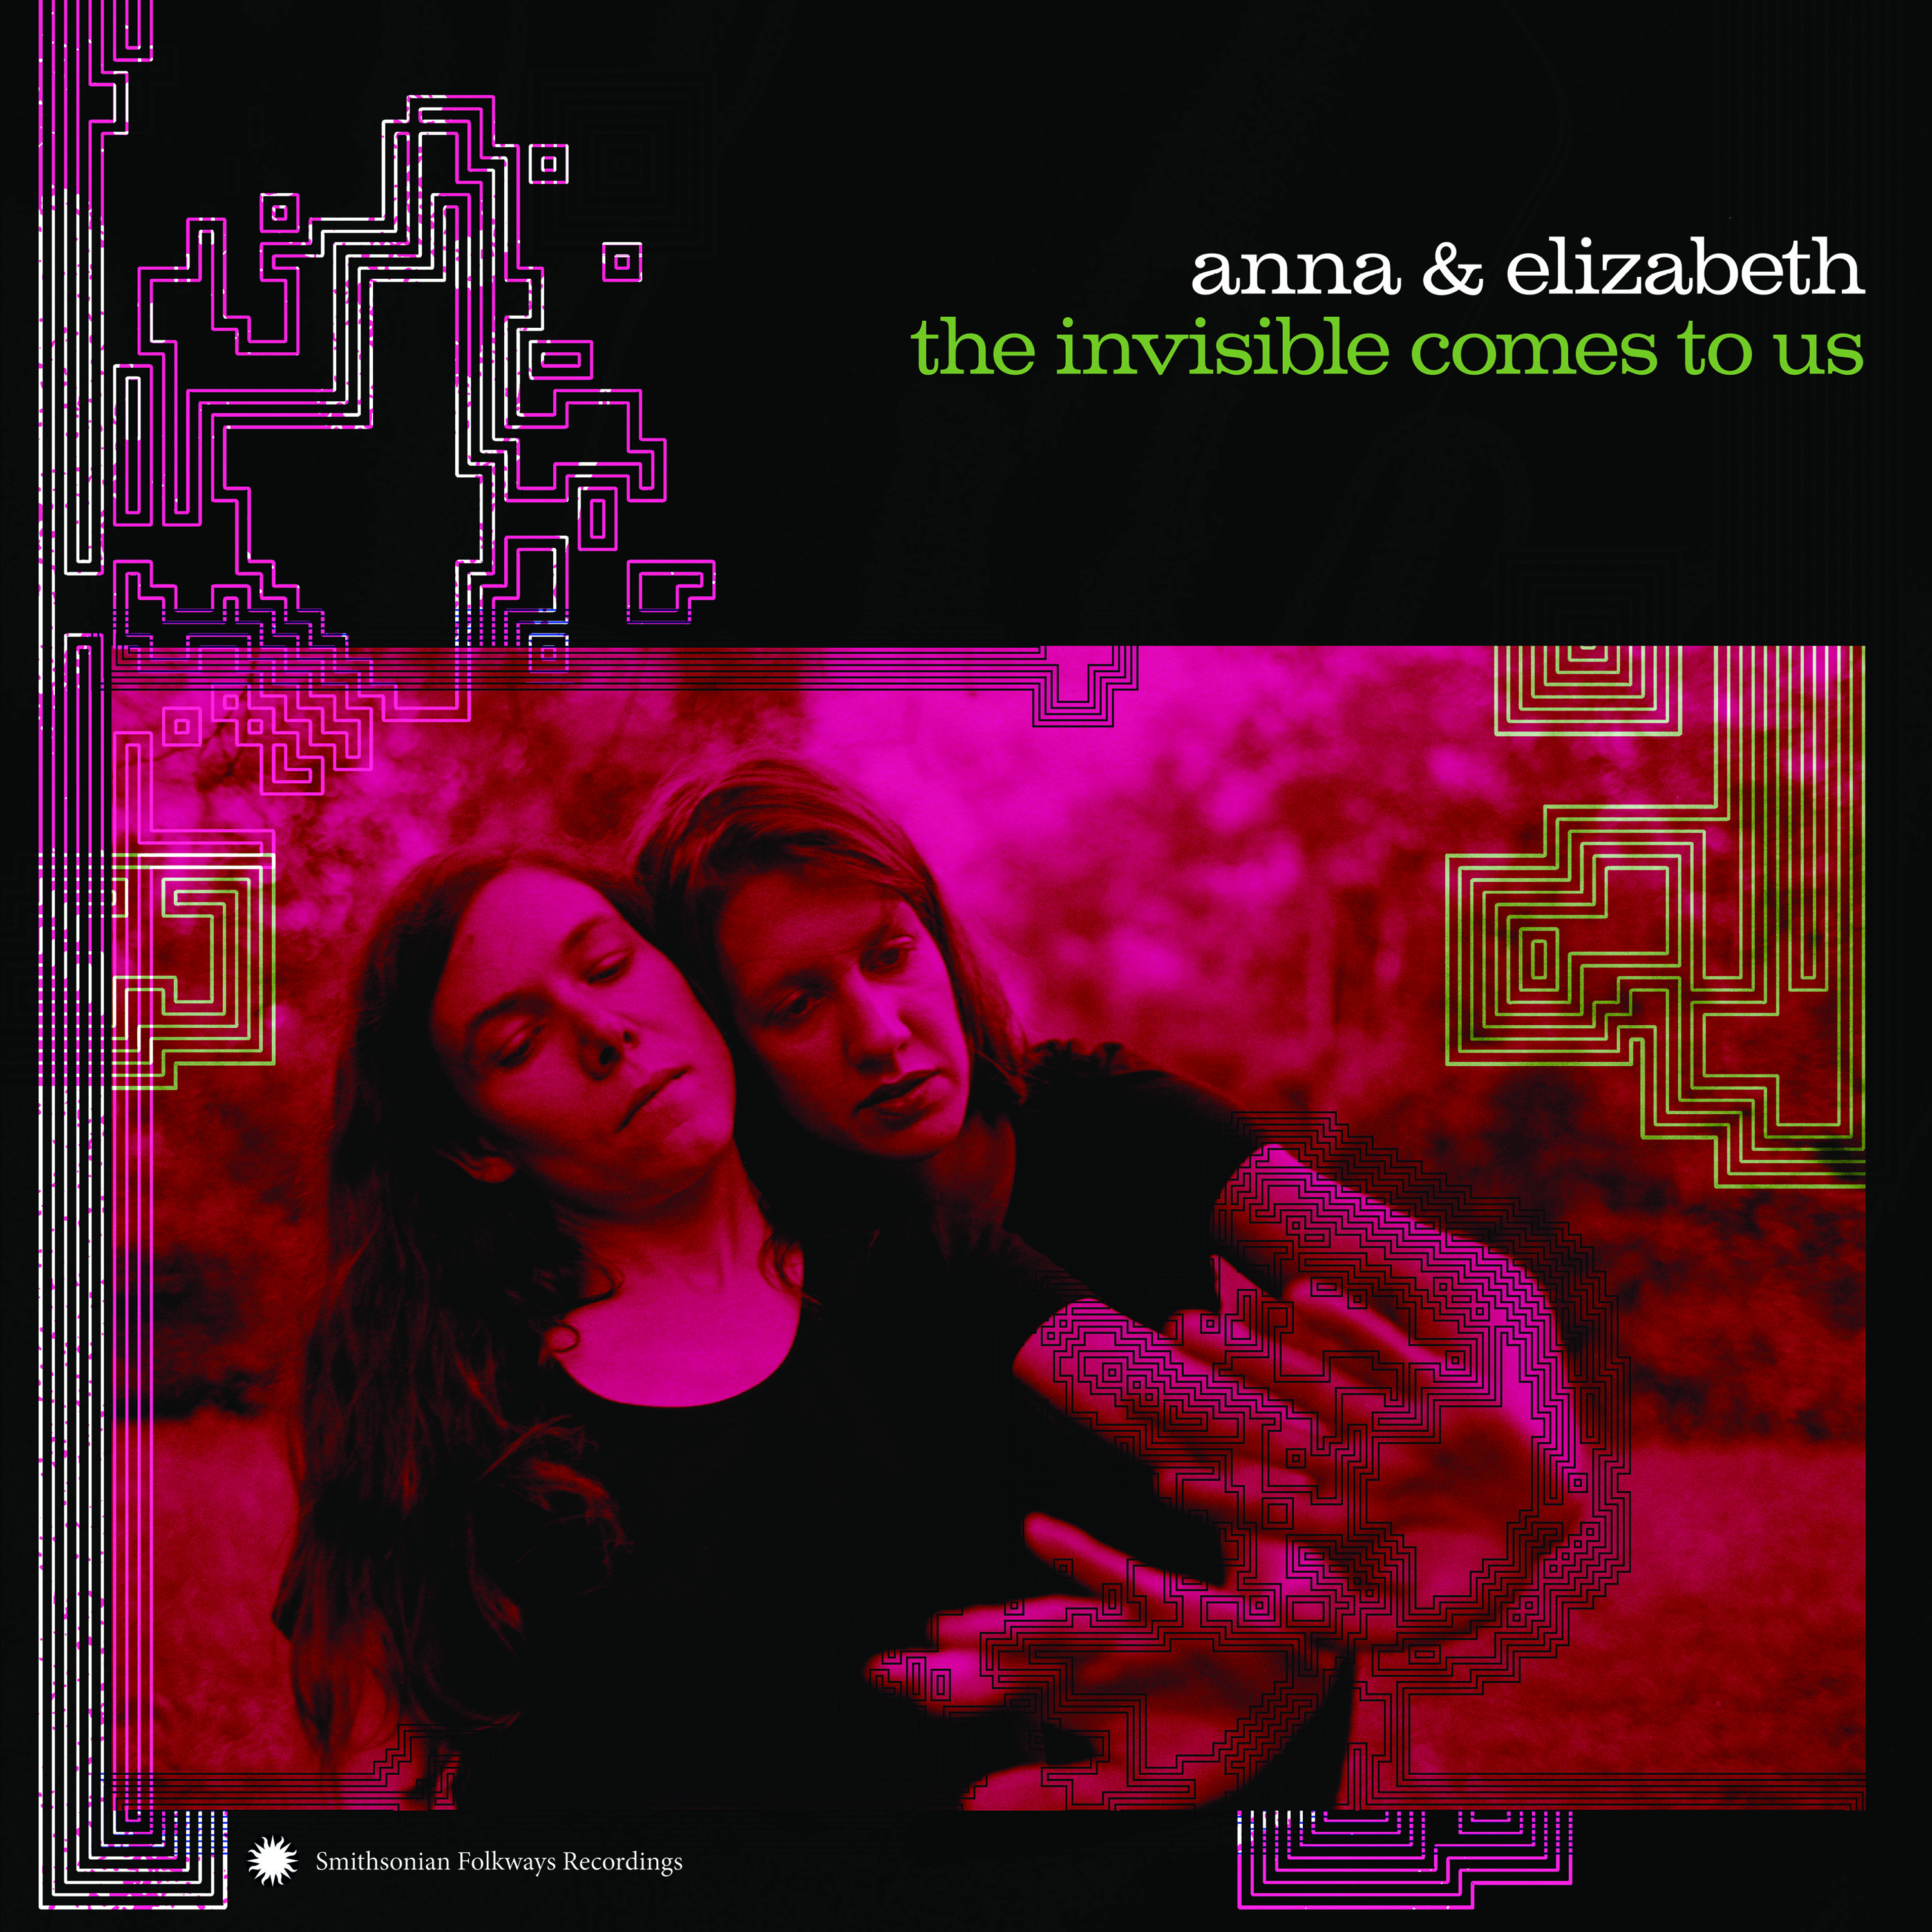 The Invisible Comes to Us by Anna & Elizabeth